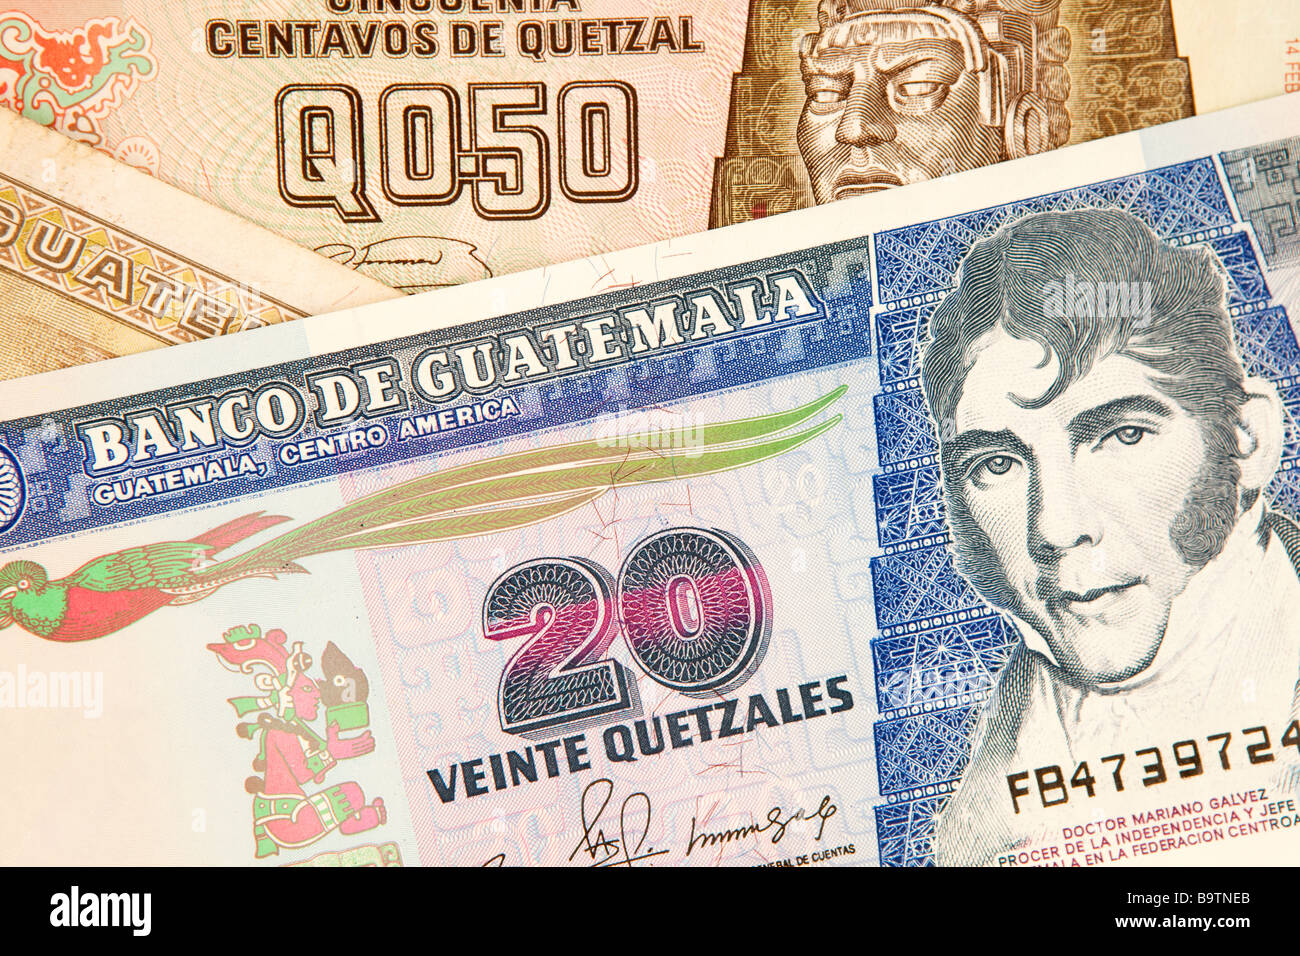 Money currency detail of Guatemalan 20 Quetzal and 50 centavos banknotes Stock Photo